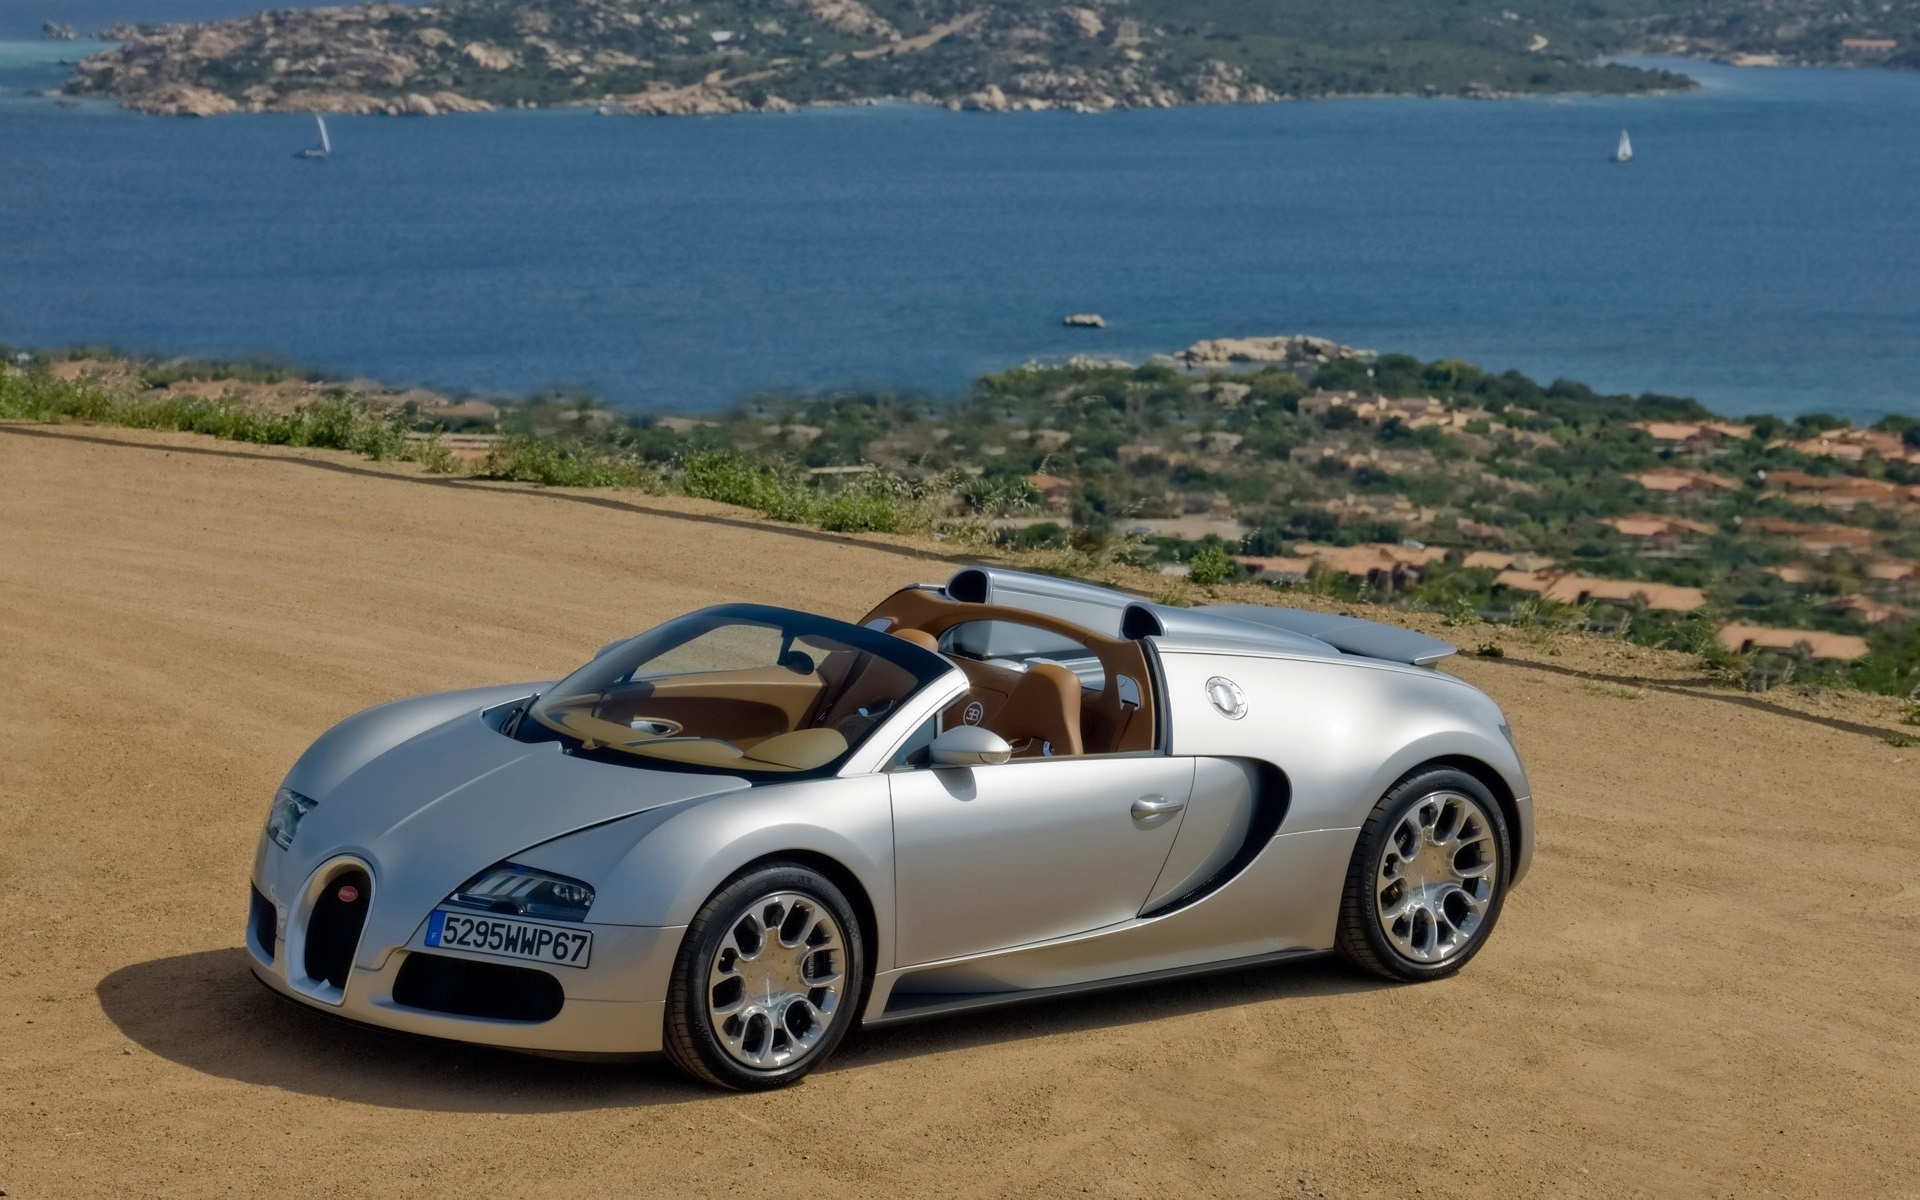 Bugatti Veyron 16.4 Grand Sport 2010 in Sardinia - Front And Side Panorama for 1920 x 1200 widescreen resolution